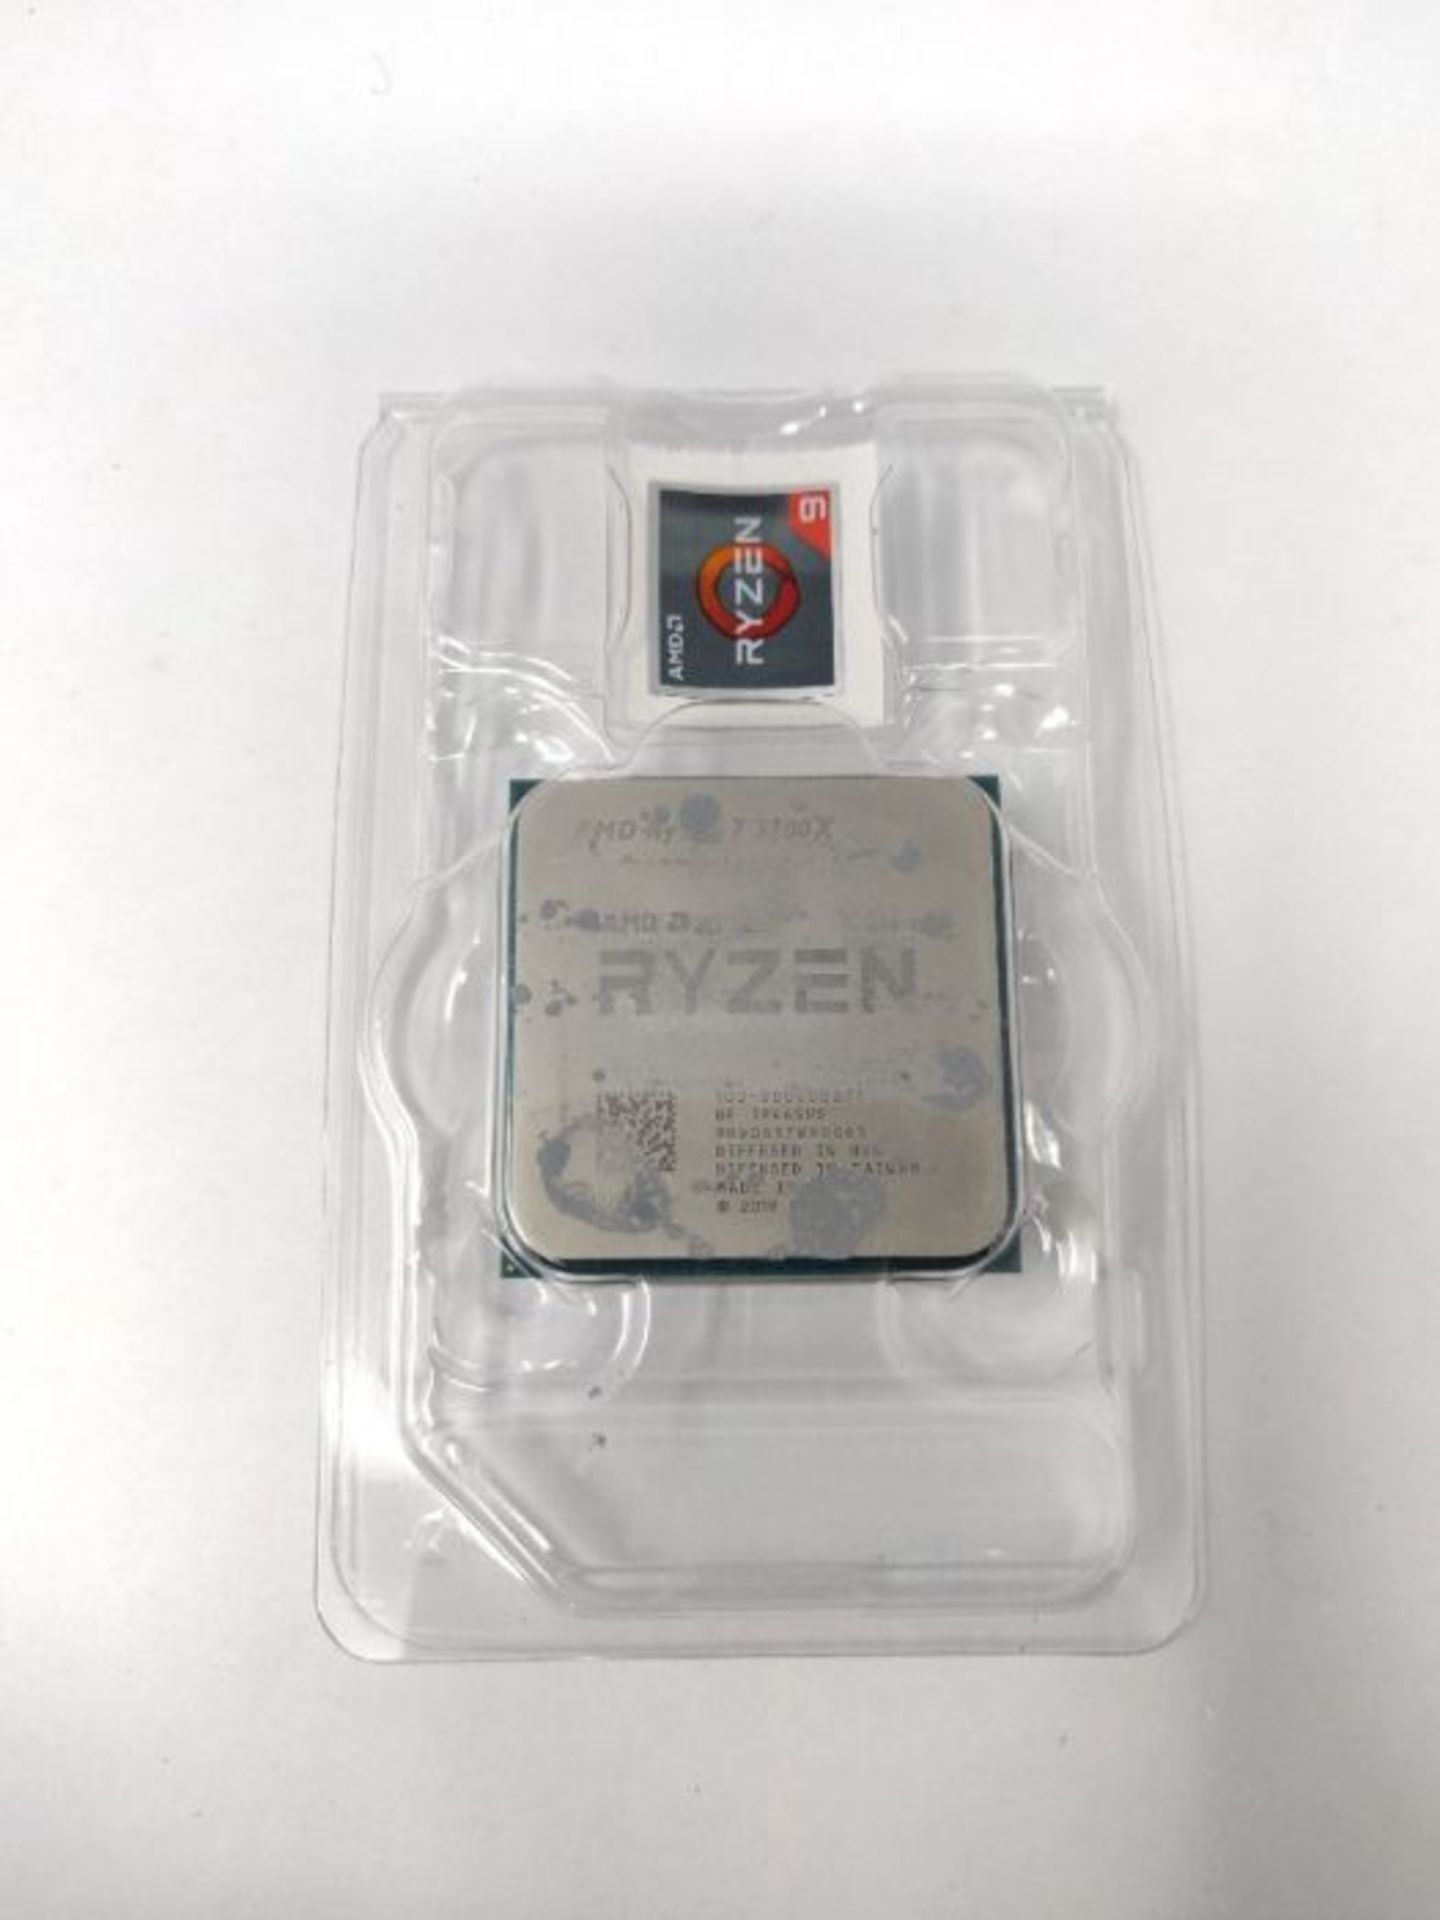 RRP £239.00 AMD Ryzen 7 3700X Processor (8C/16T, 36 MB Cache, 4.4 GHz Max Boost) - Image 3 of 3